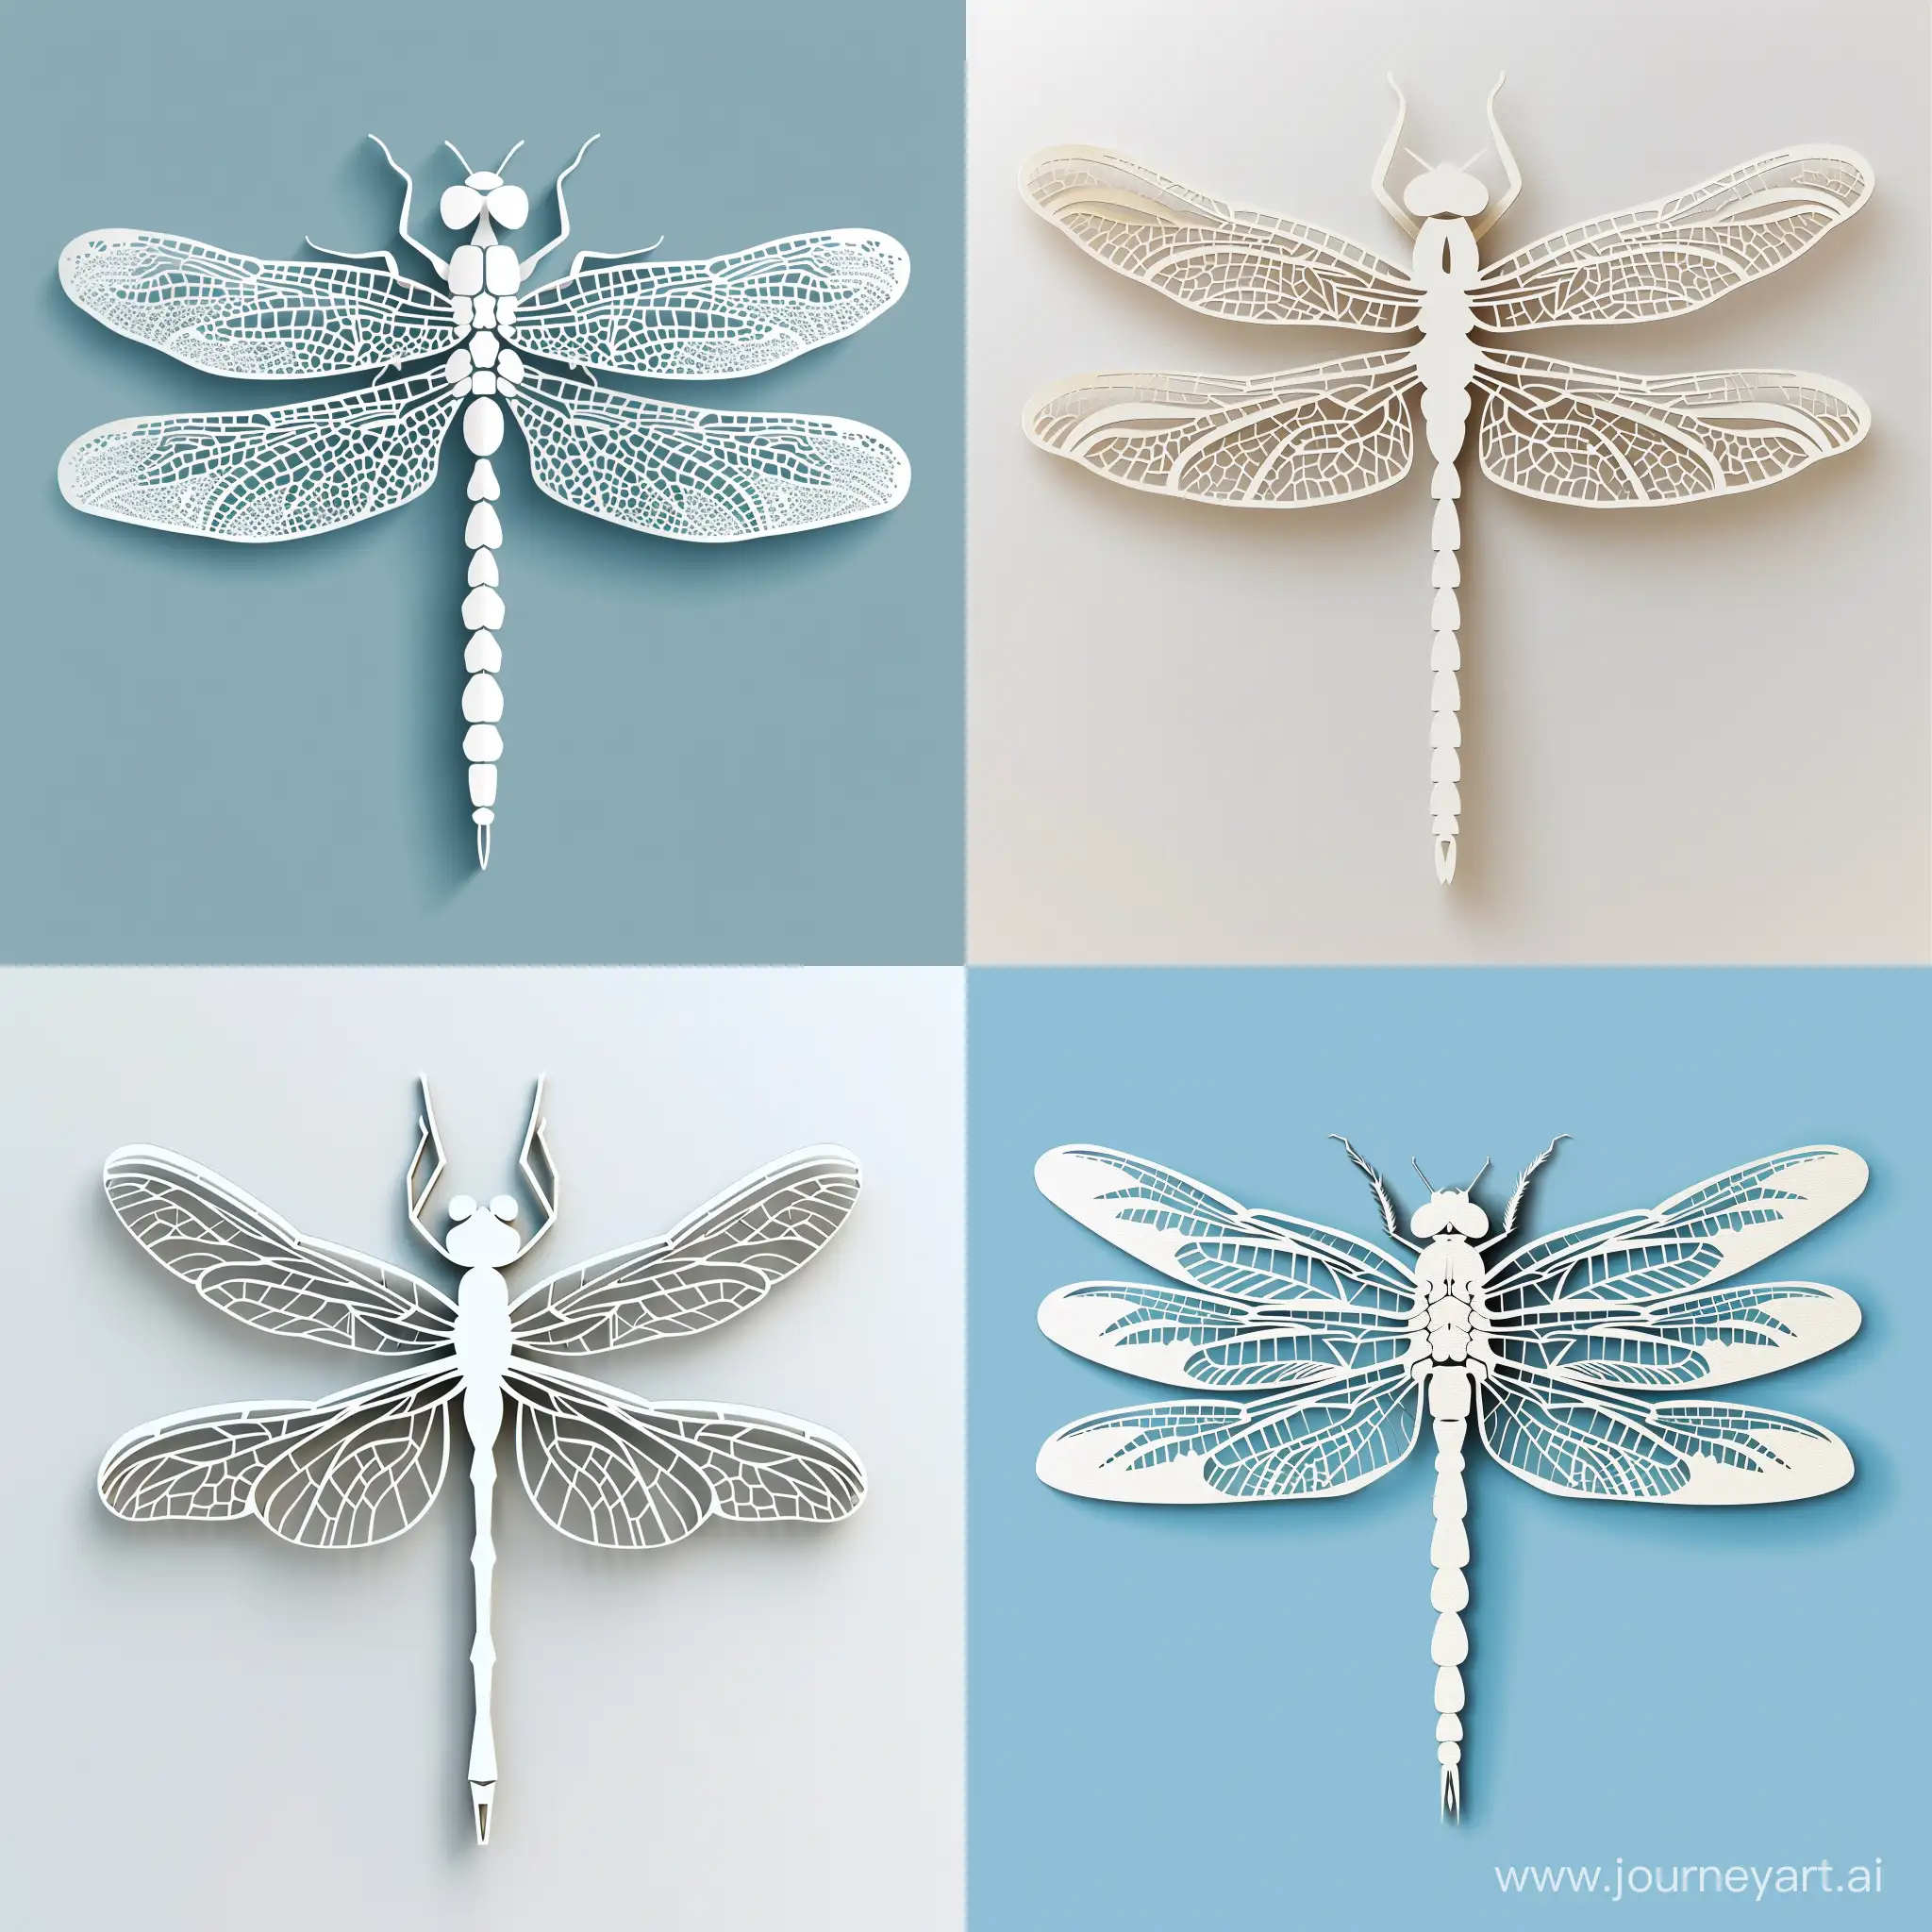 Intricate-Vector-Dragonfly-Cut-Paper-Art-with-Exquisite-Openwork-Wings